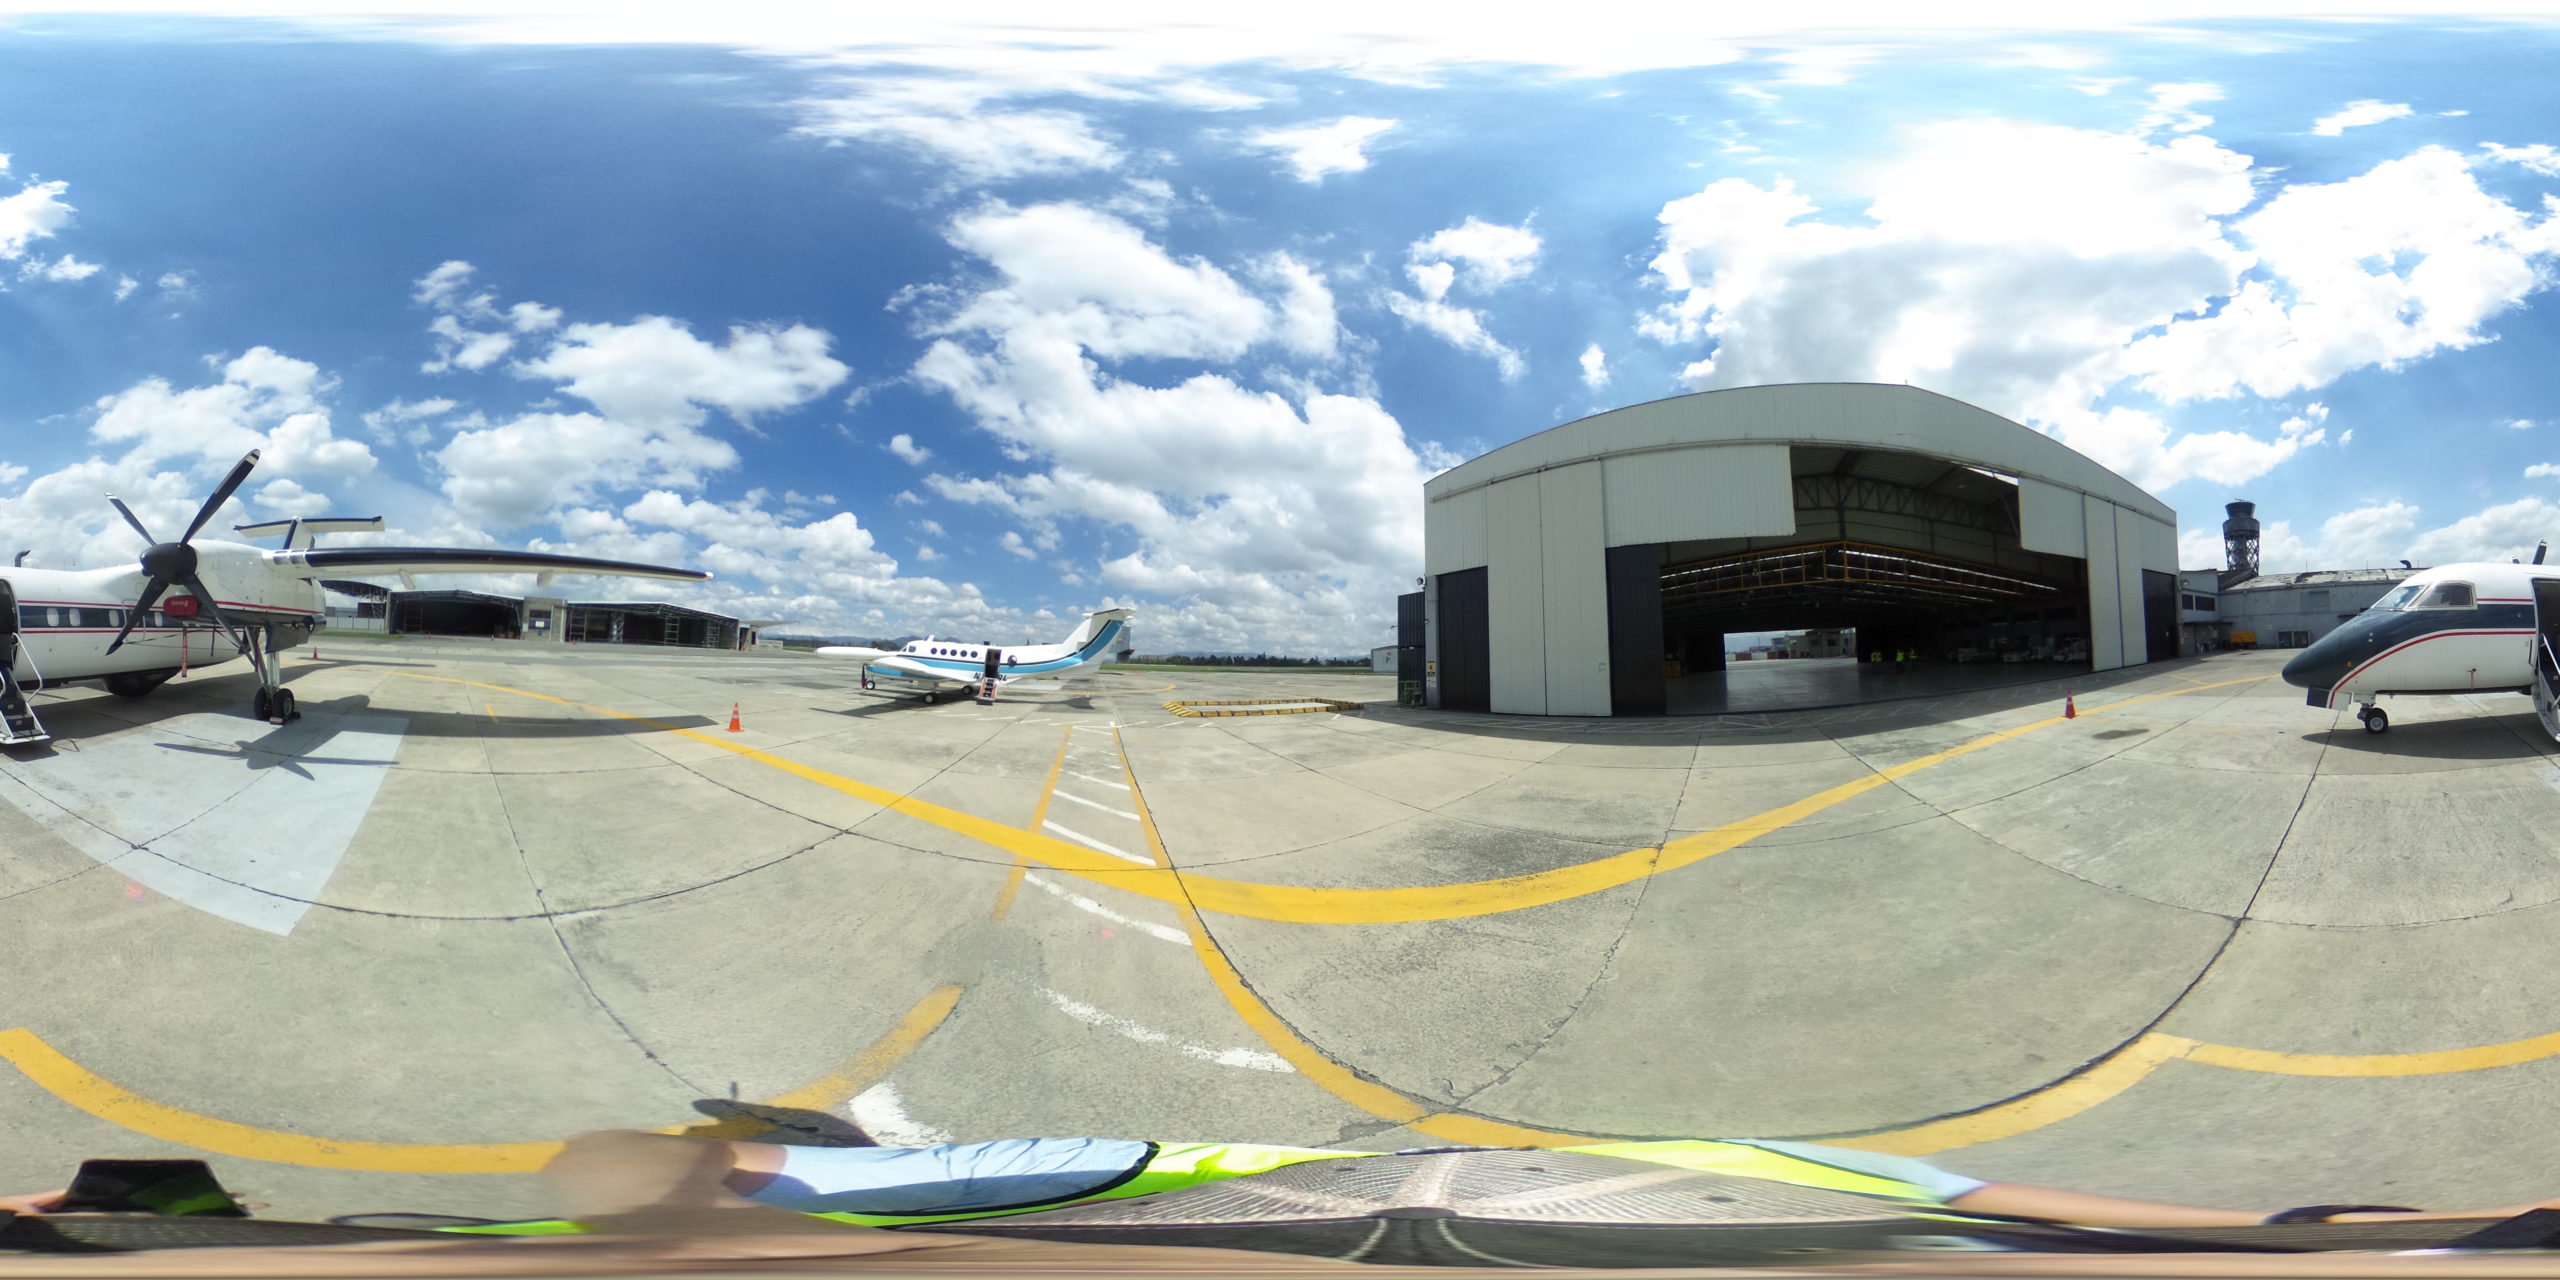 MAG hangar, ramp, and ISR platforms located in South America.